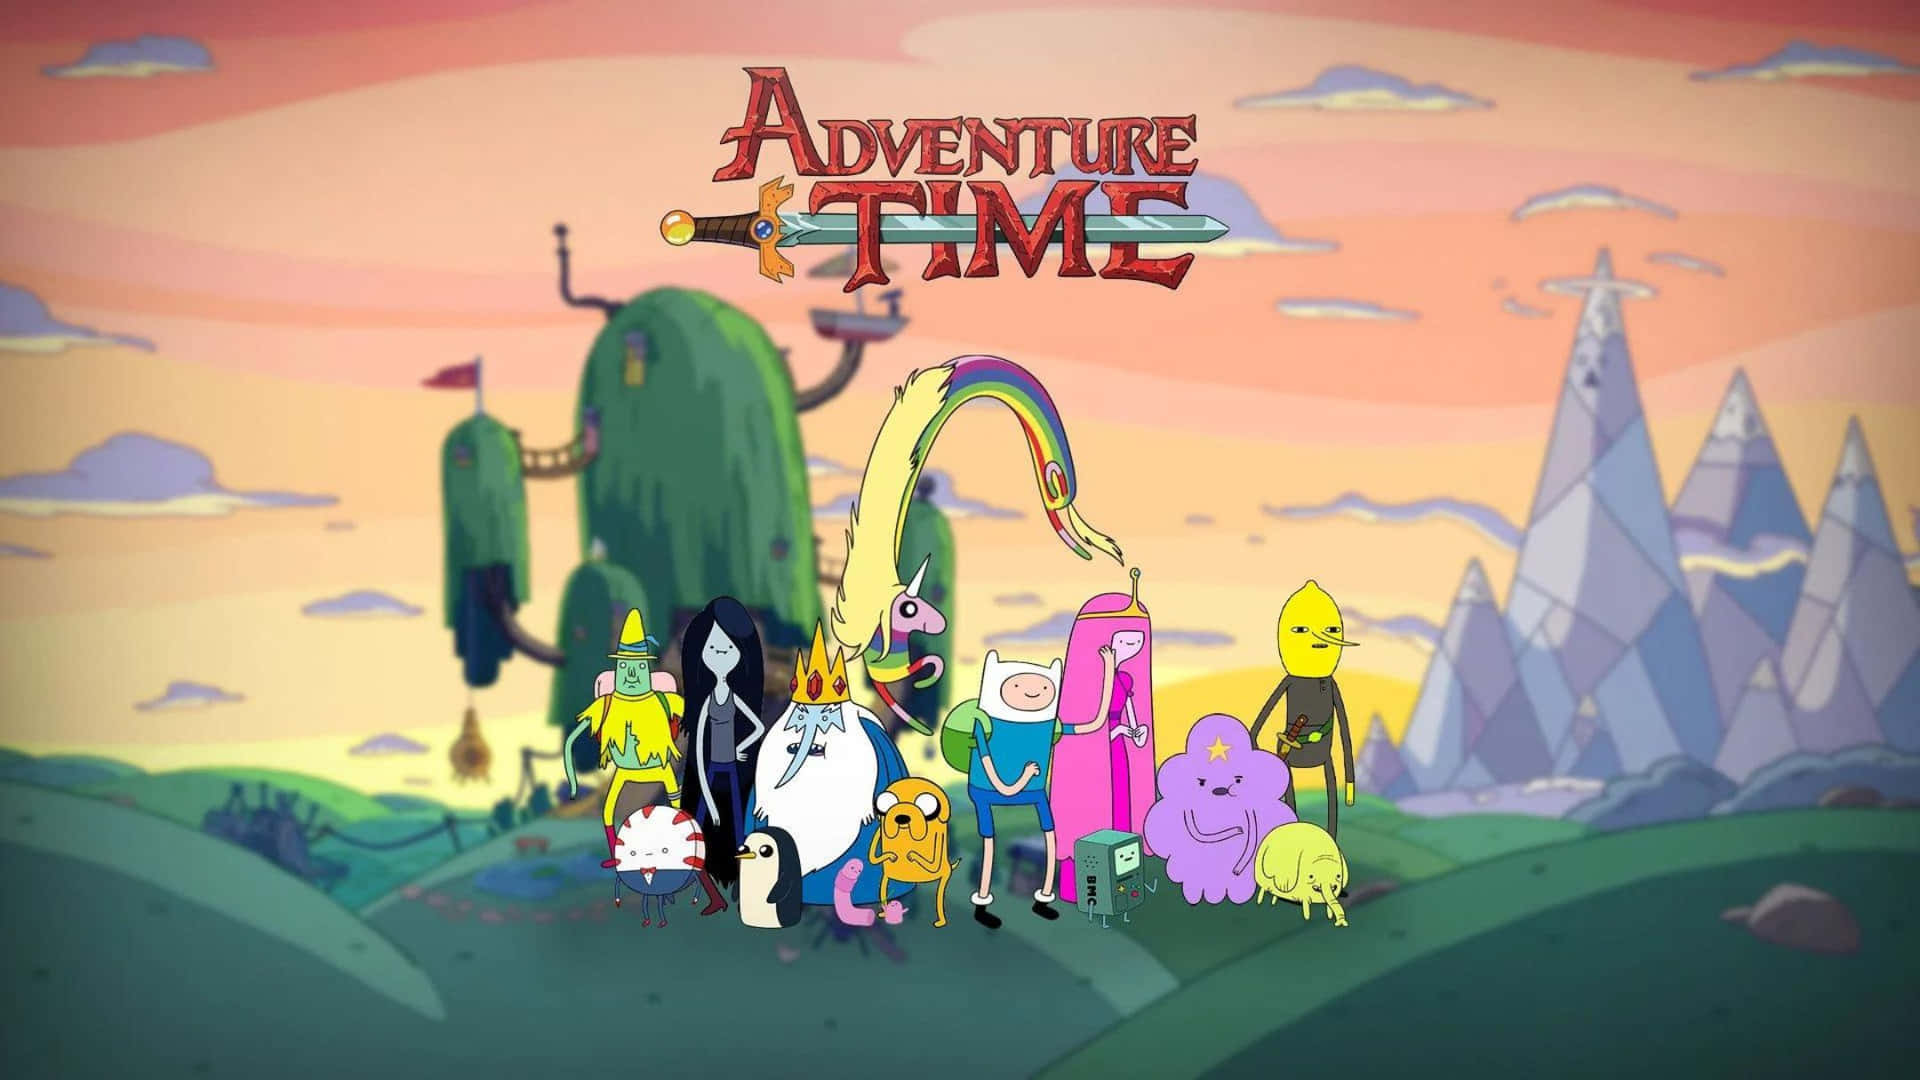 Take a magical journey to explore the Land of Ooo with Finn and Jake!